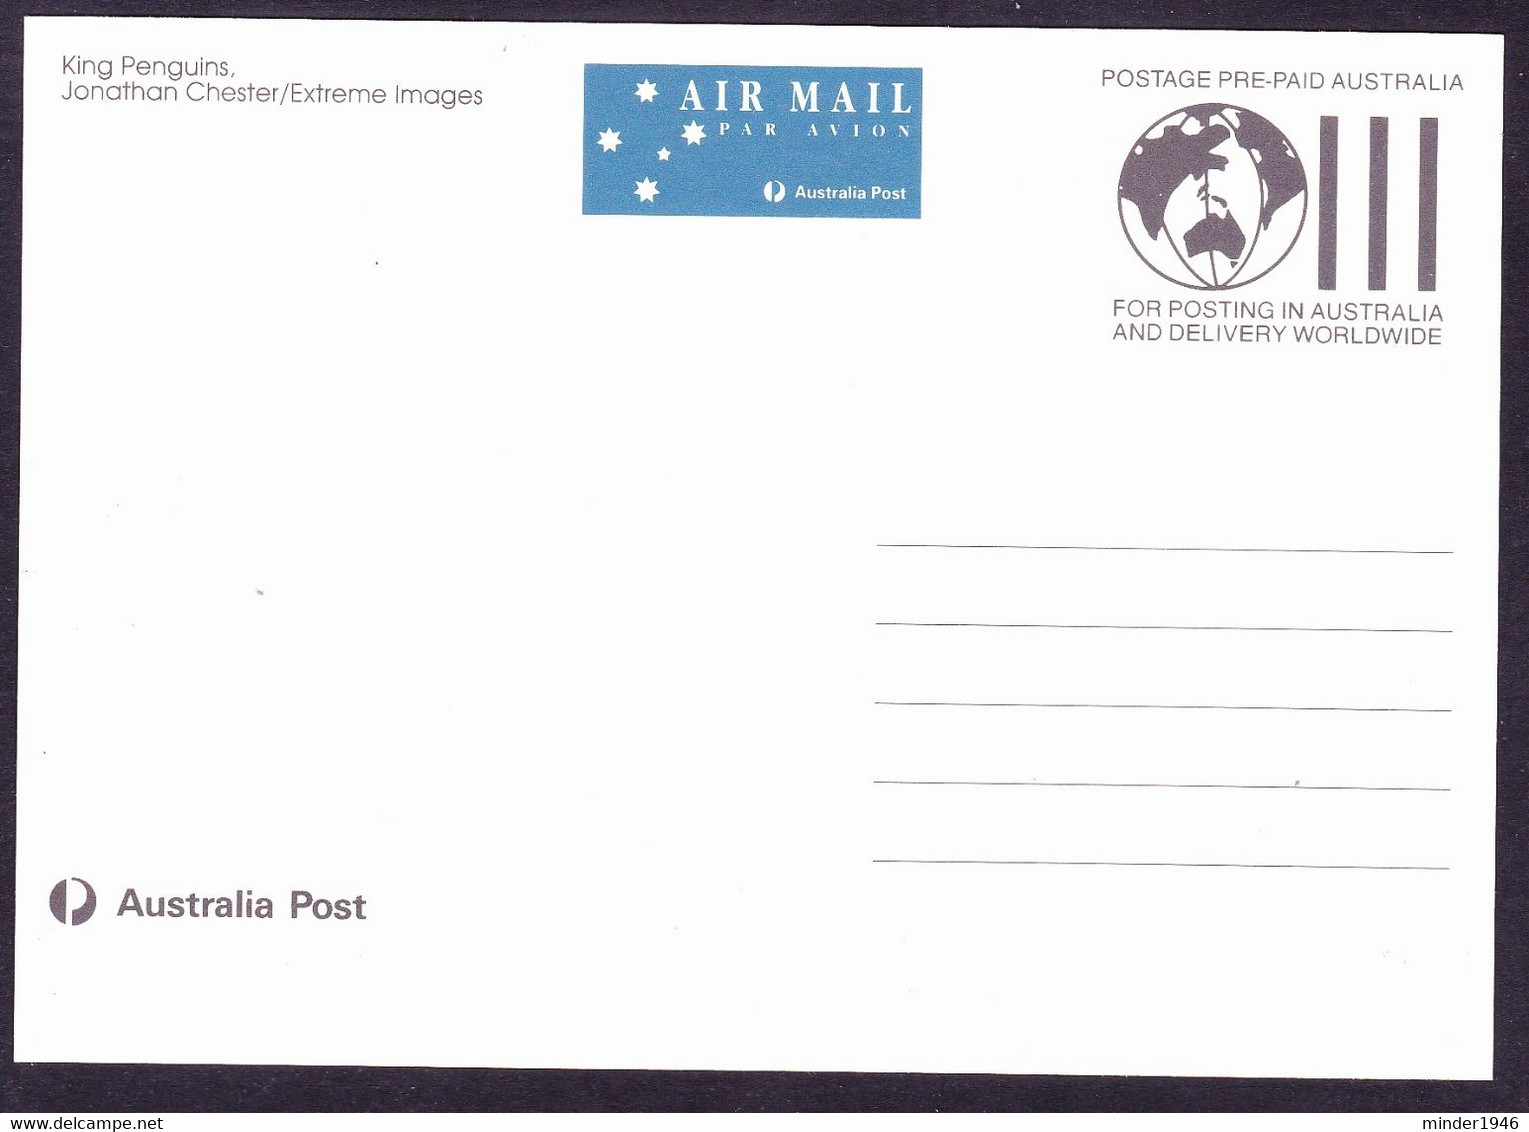 AUSTRALIAN ANTARCTIC TERRITORY (AAT) 1993 &1.30 First Day Of Issue Air Mail Postcard - King Penguins - FDC